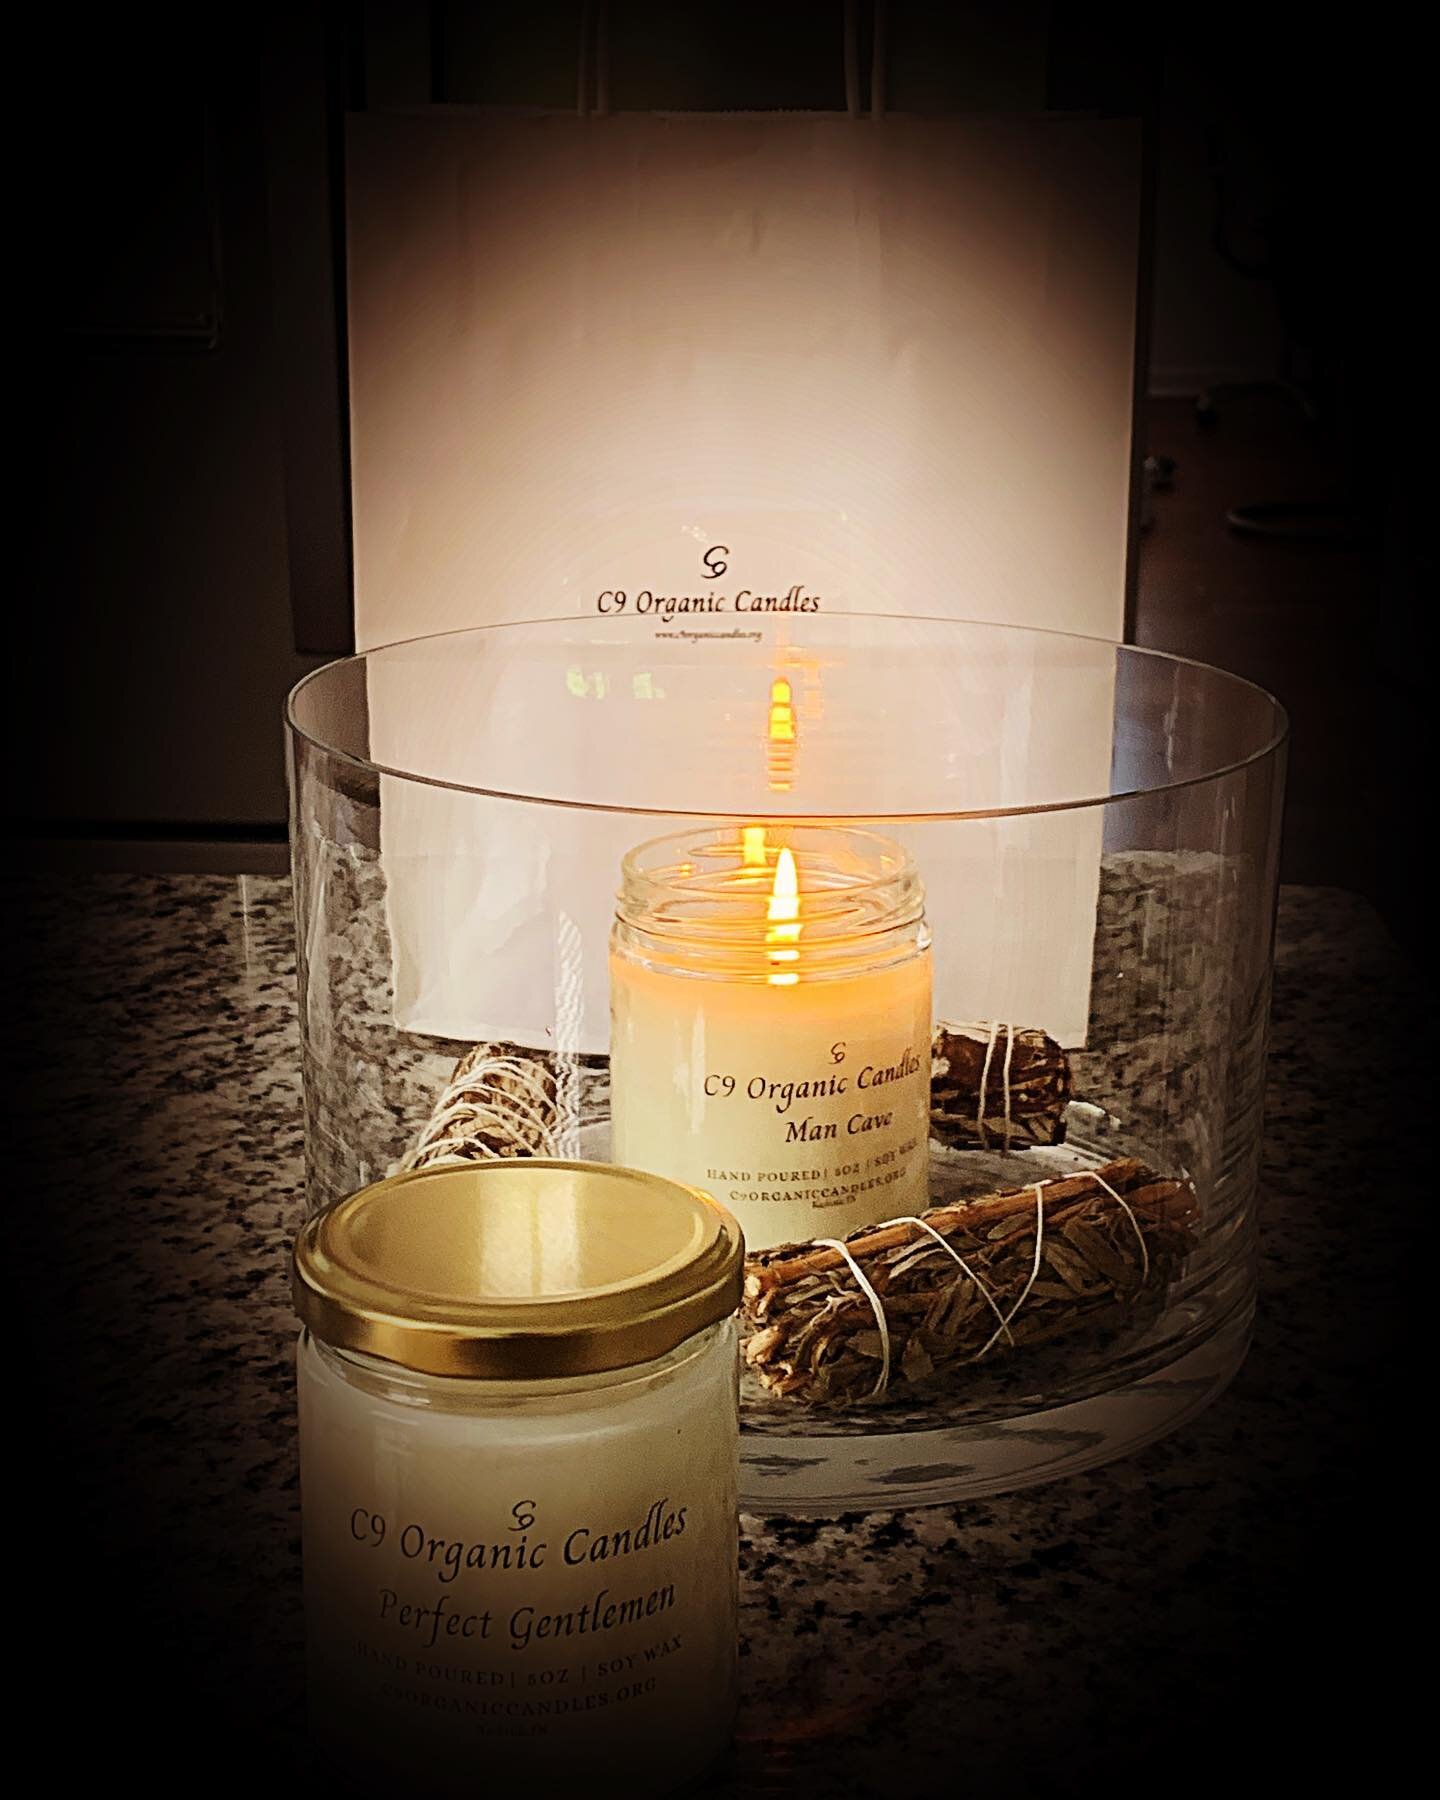 &hellip;design family and friends please take some time and treat yourself to these burning pleasures, @c9organiccandles awaits!